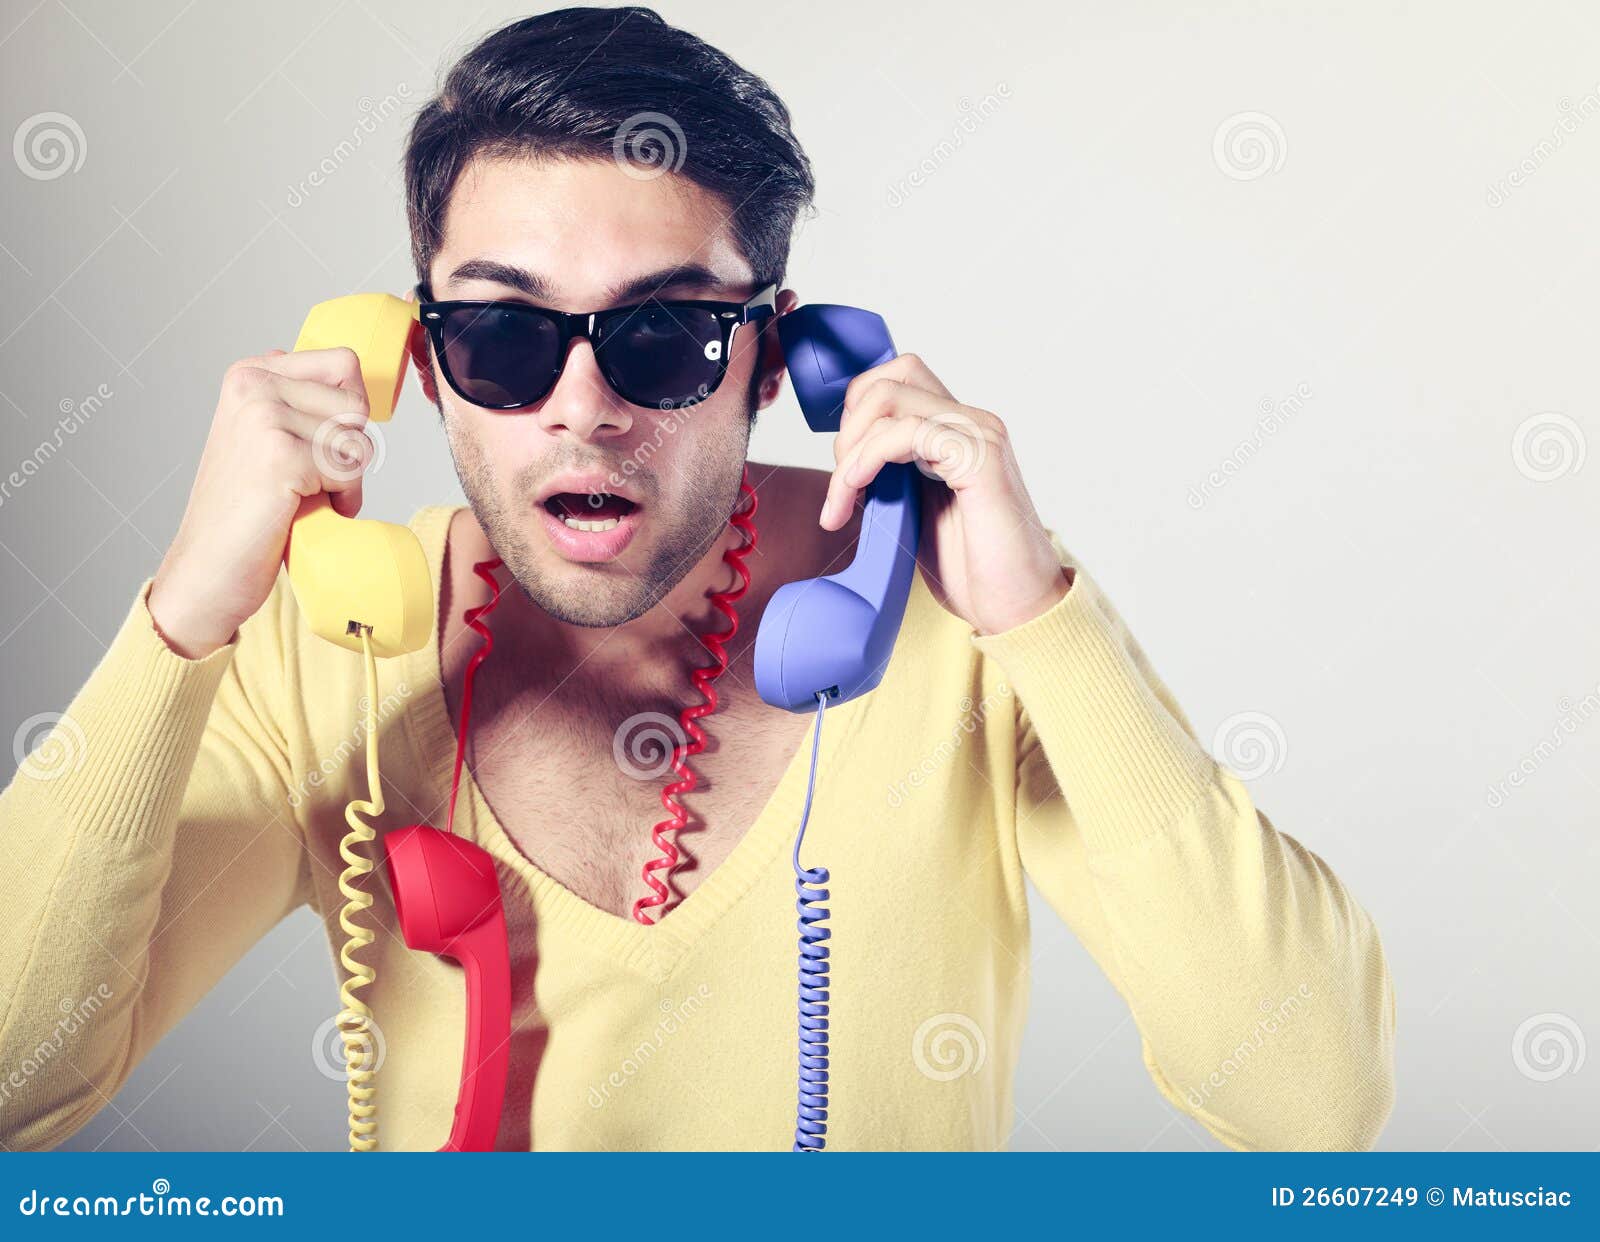 Funny Call Center Guy With Colorful Phones Stock Image - Image of cool